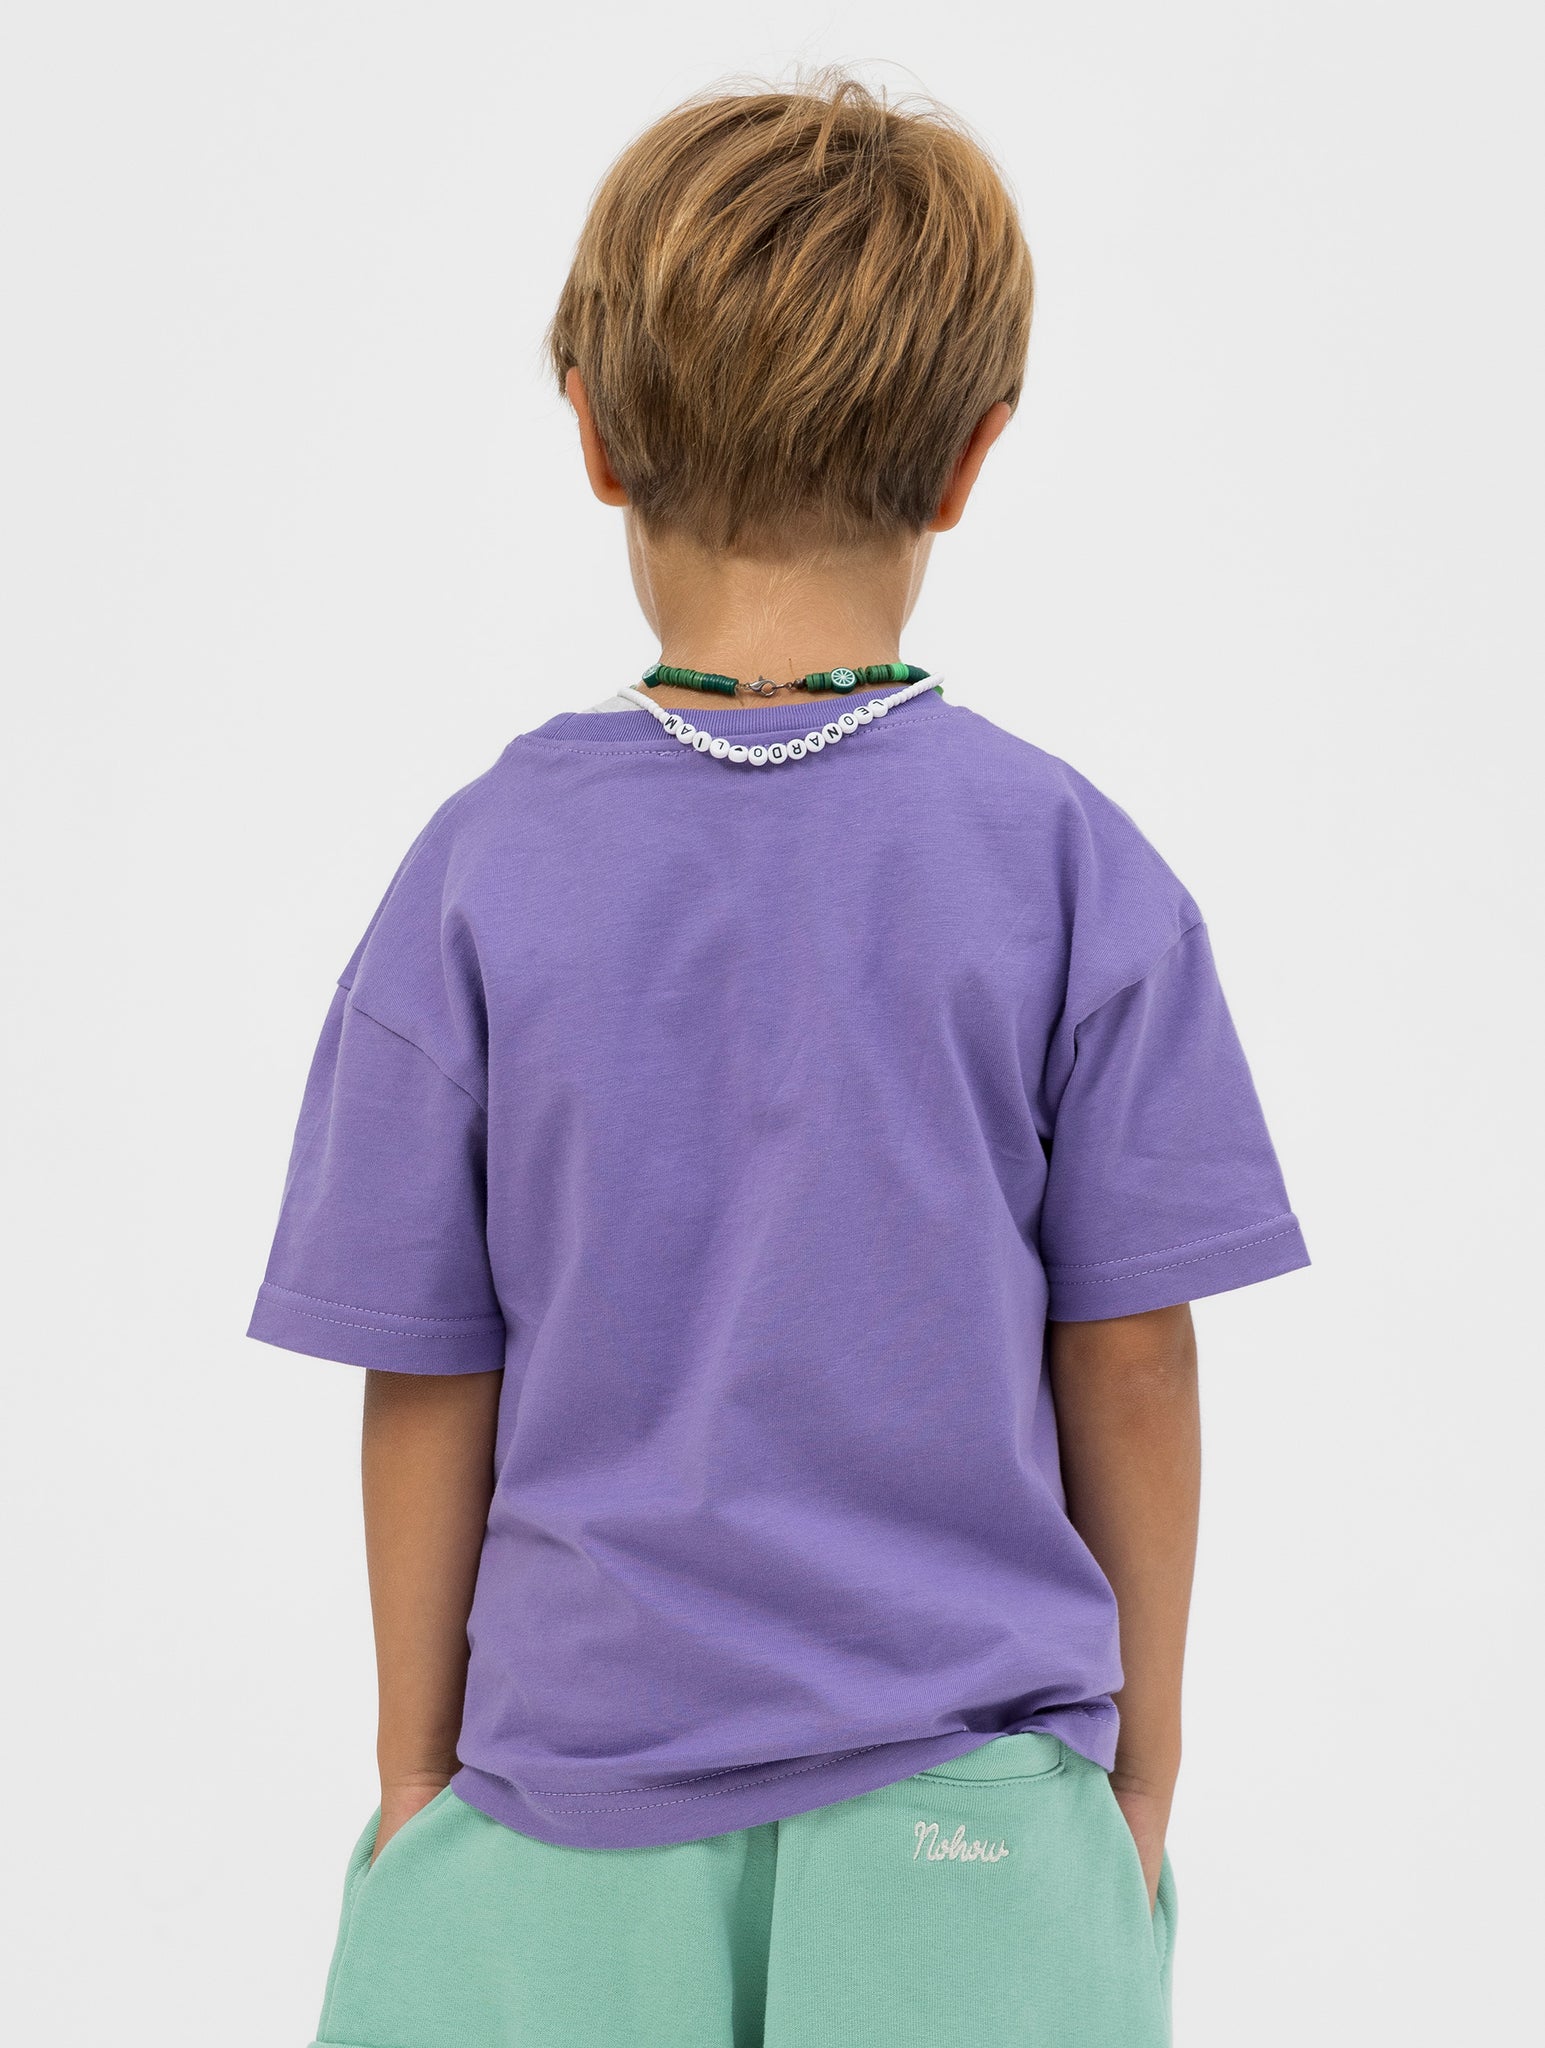 NOHOW LOGO KID'S T-SHIRT IN LILAC